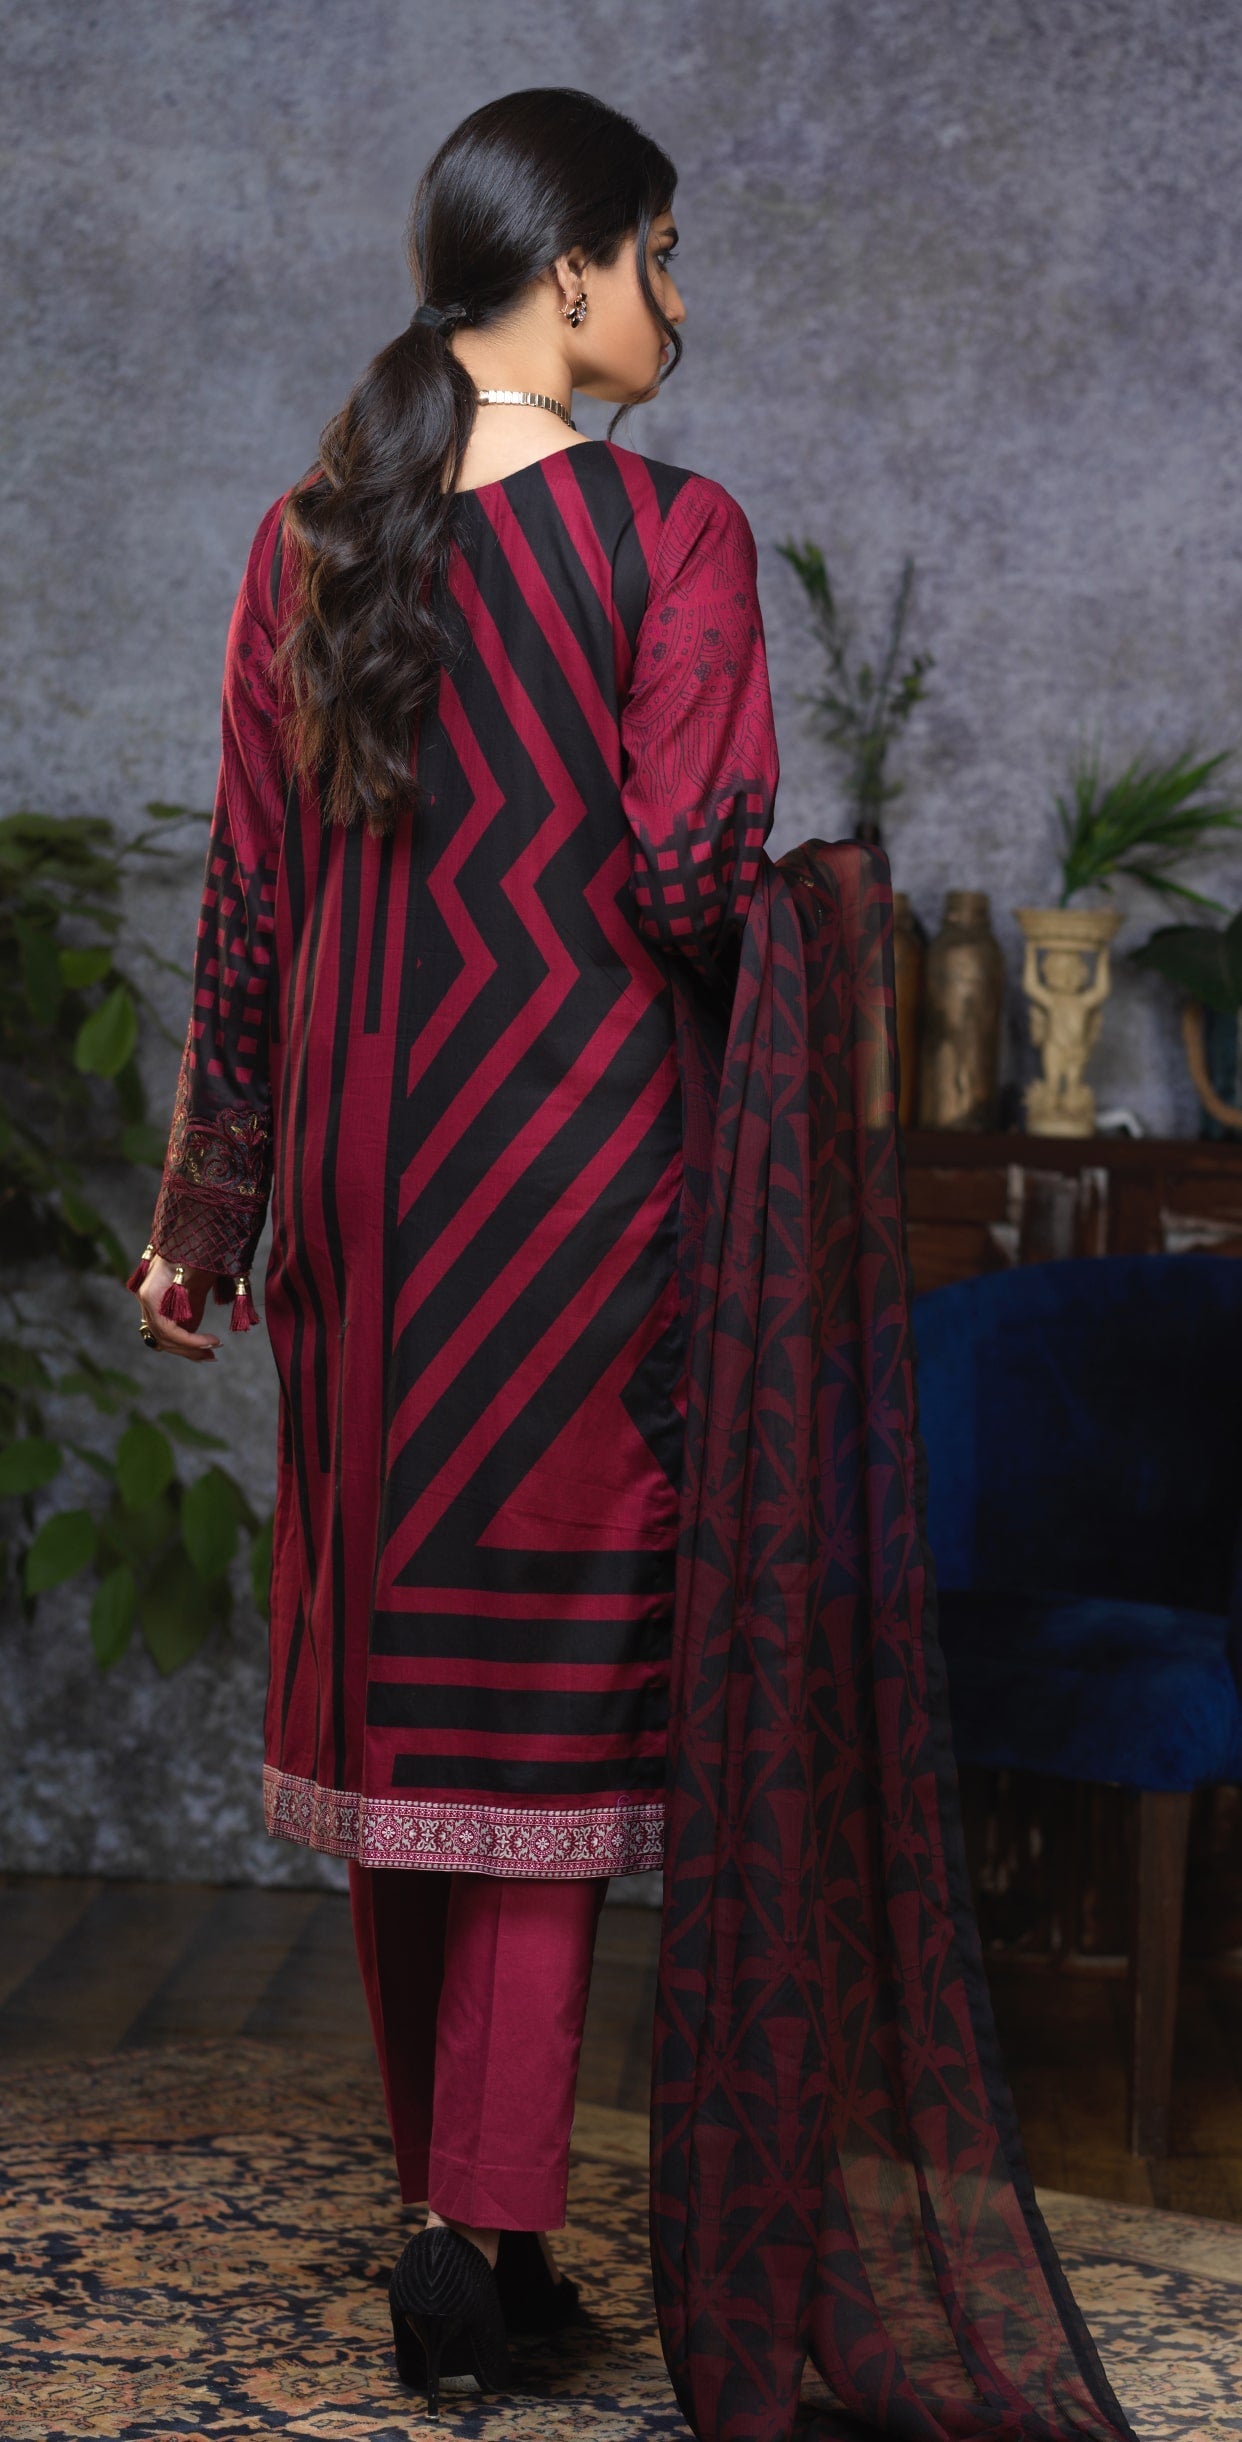 Stitched Printed Cambric Shirt with Embroidery Sleeves and Embroidered Neck Lace , Printed Chiffon Dupatta & Dyed Trouser (RC-172A) - SalitexOnline